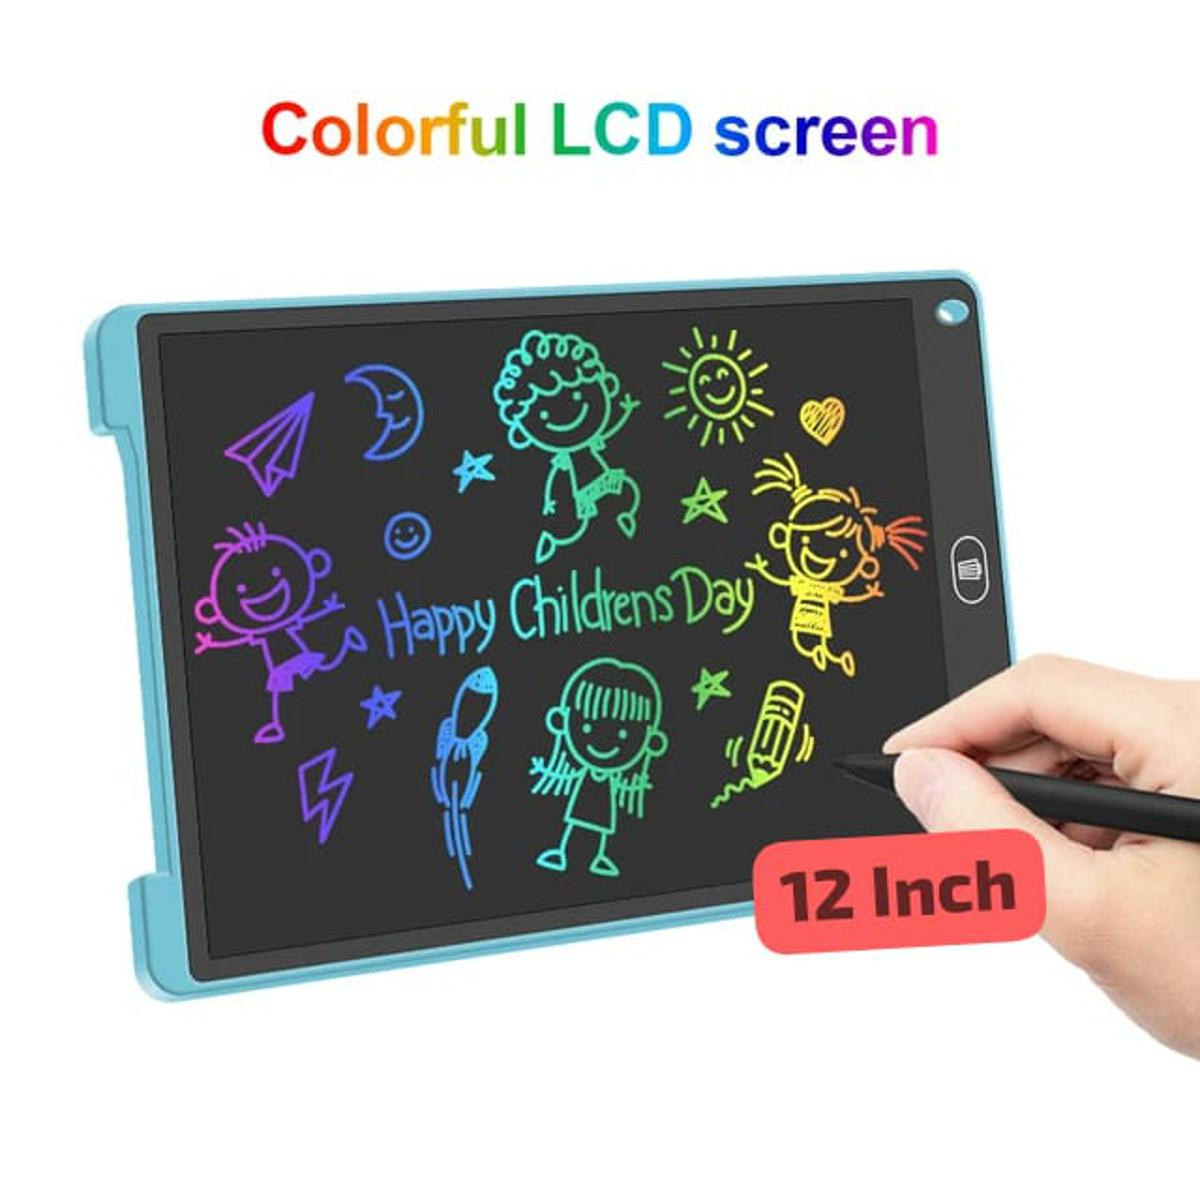 12" LCD Writing Digital Tablet Draw Product Code: 3258